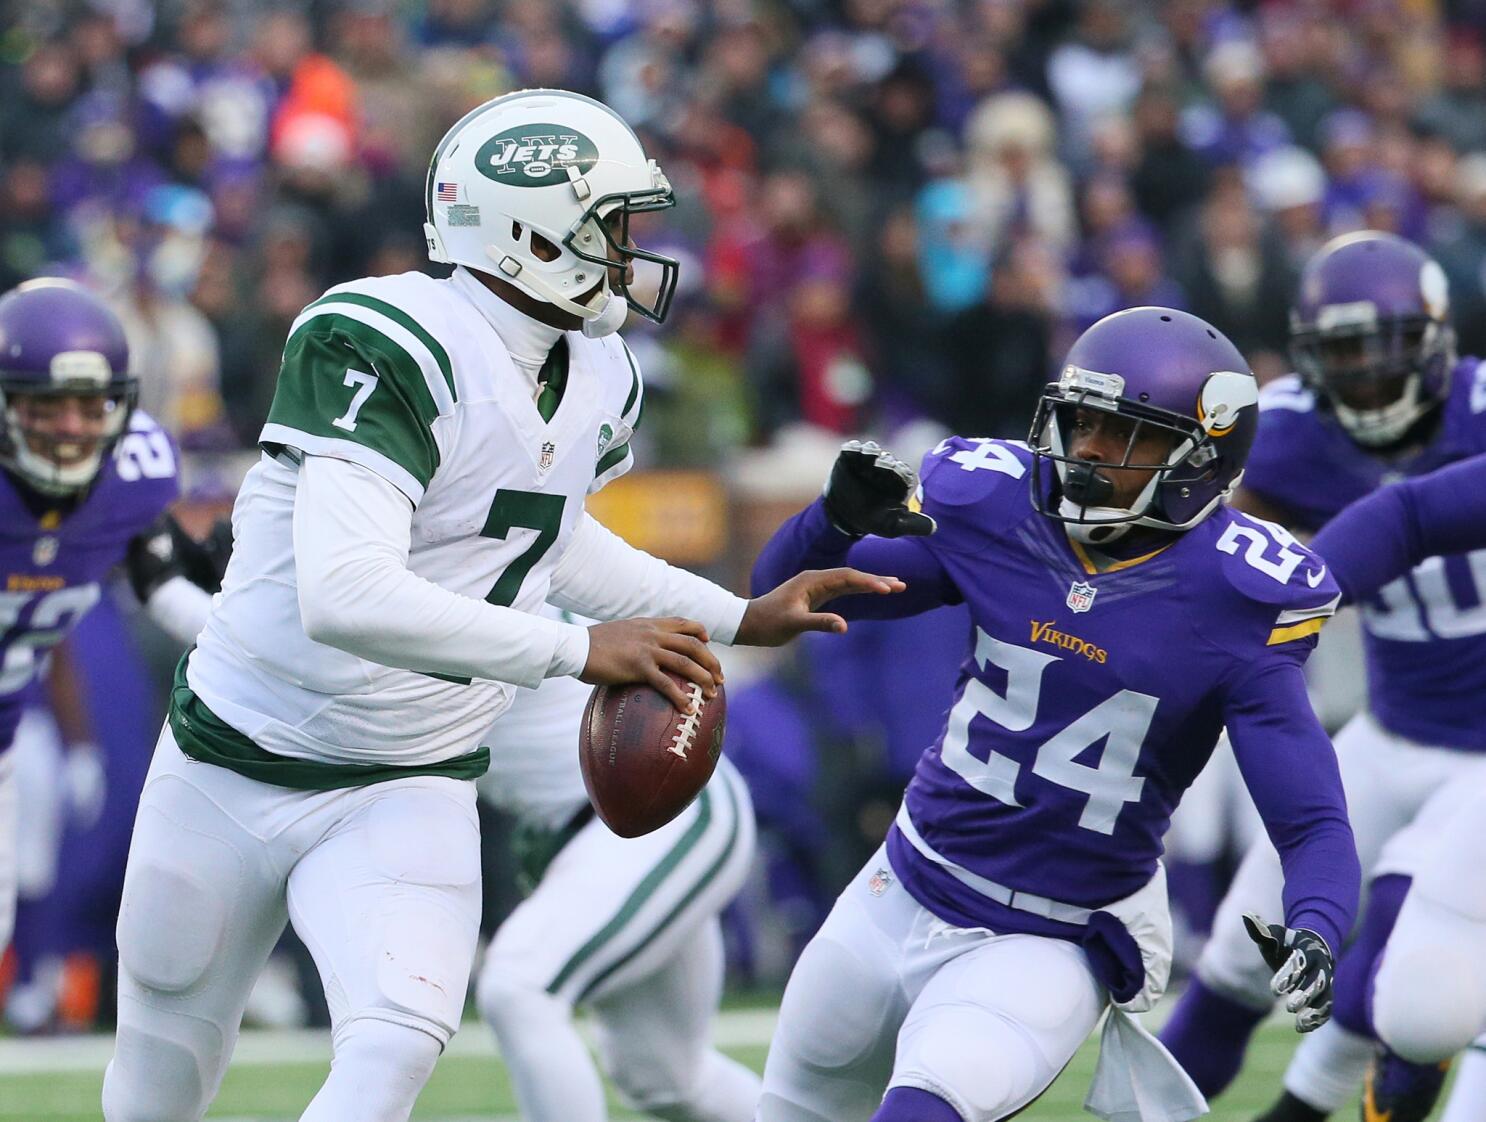 Jets' receiver: Geno Smith or Mike Vick?